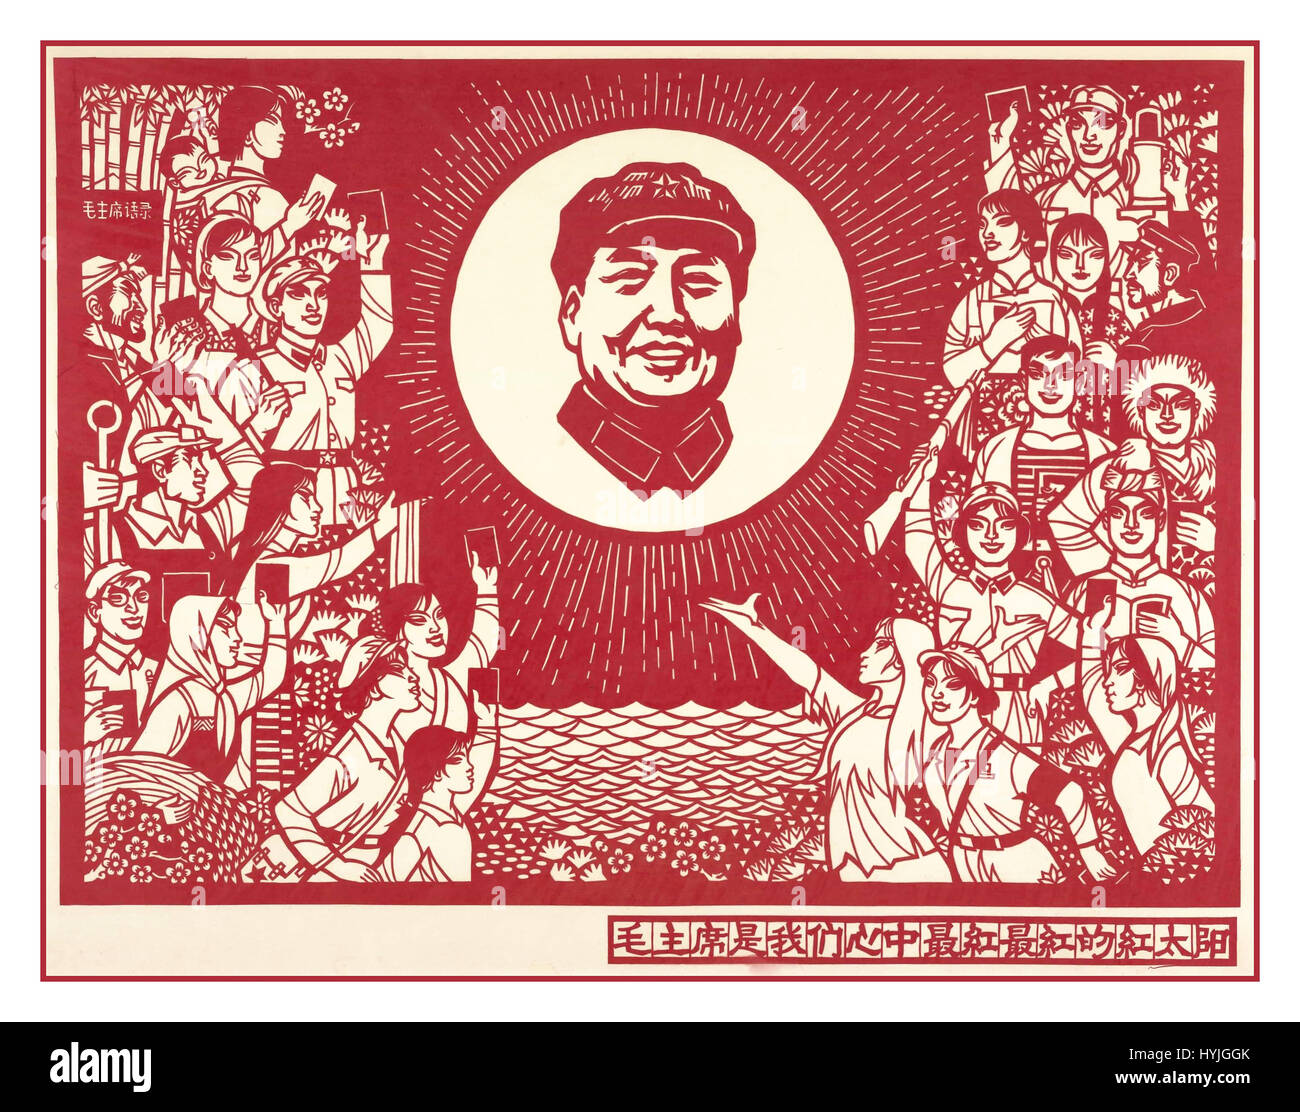 Classic vintage Chinese propaganda poster titled 'Chairman Mao is the Reddest, Reddest Sun in Our Heart' 1967. Stock Photo